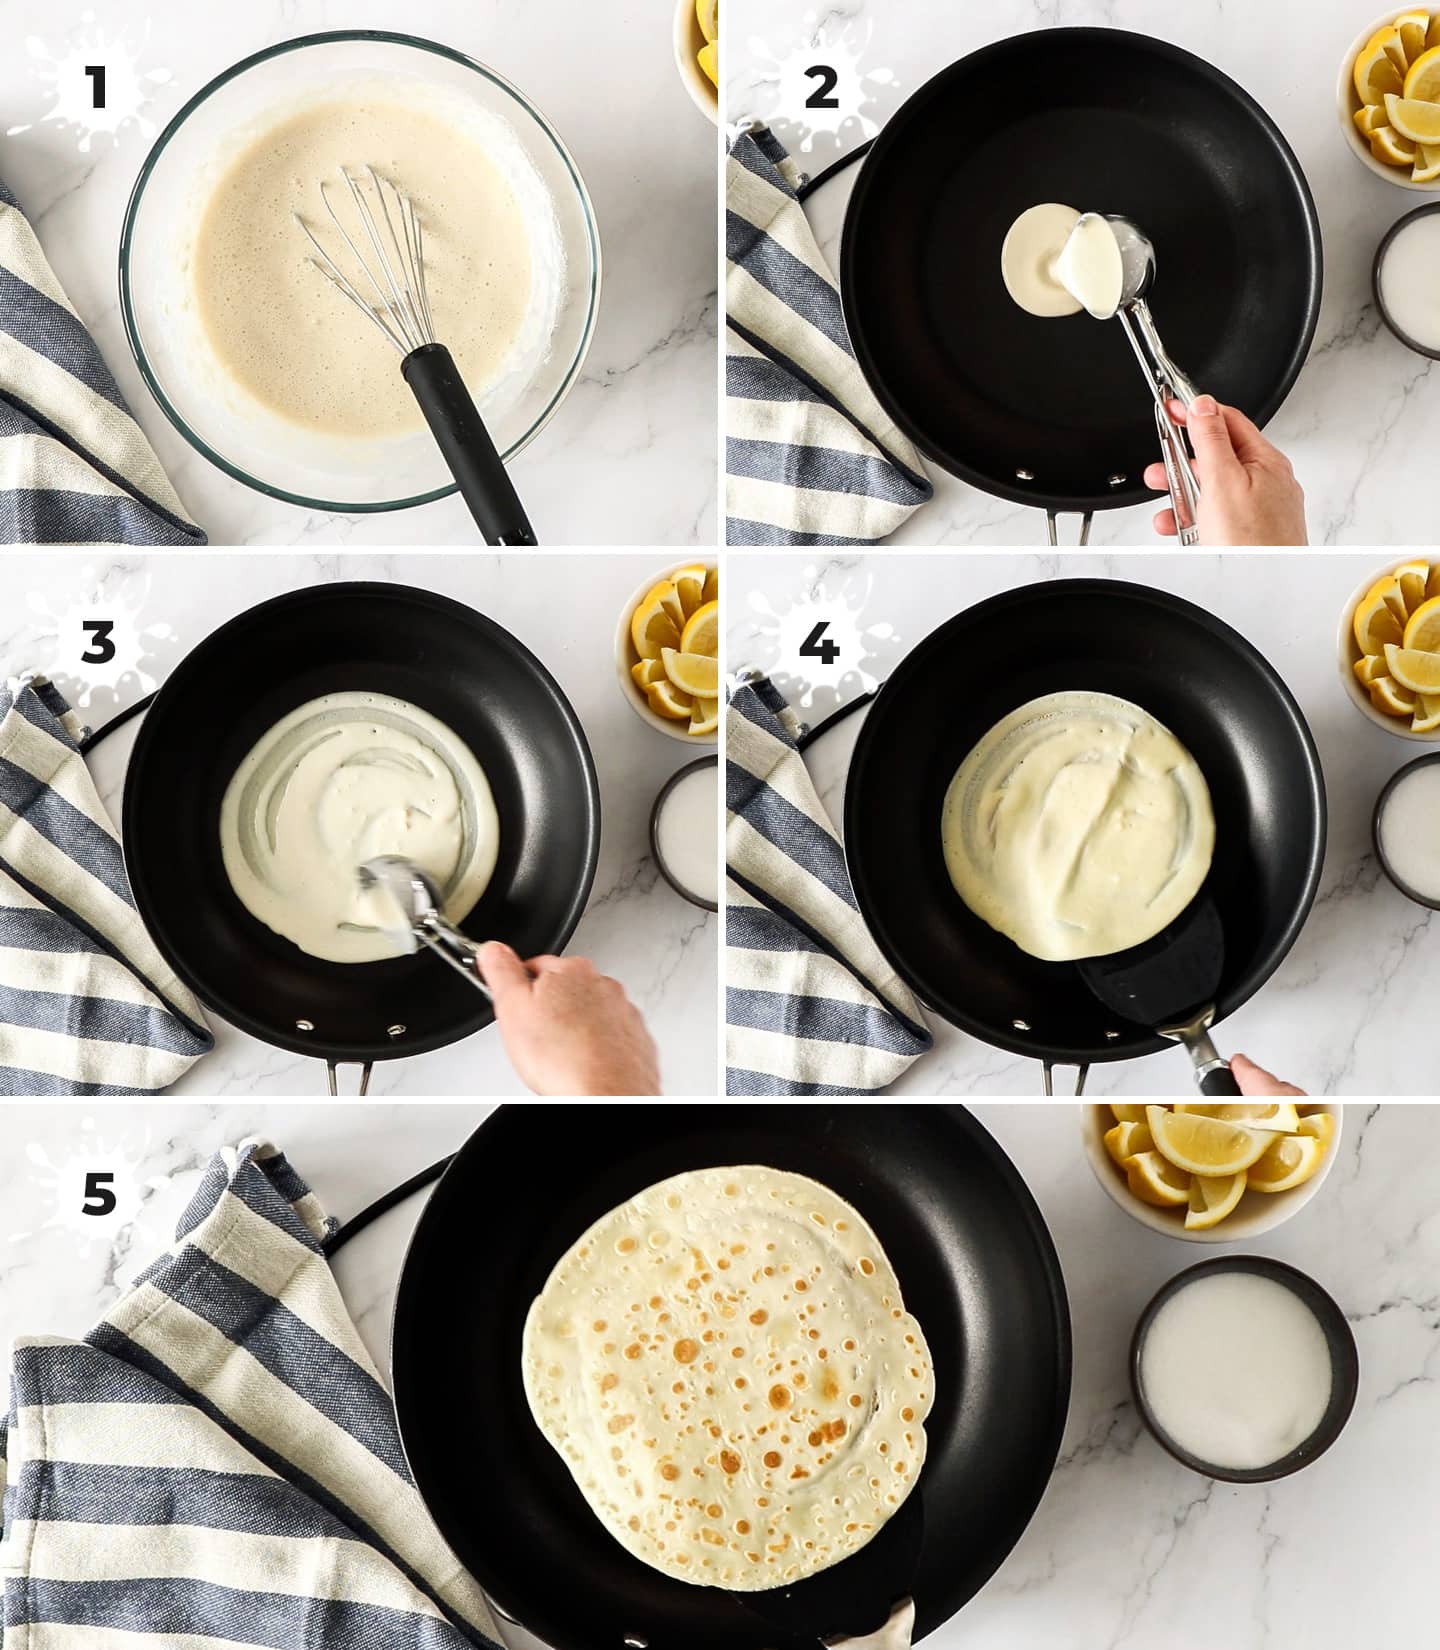 A collage of 5 images showing how to make english pancakes.